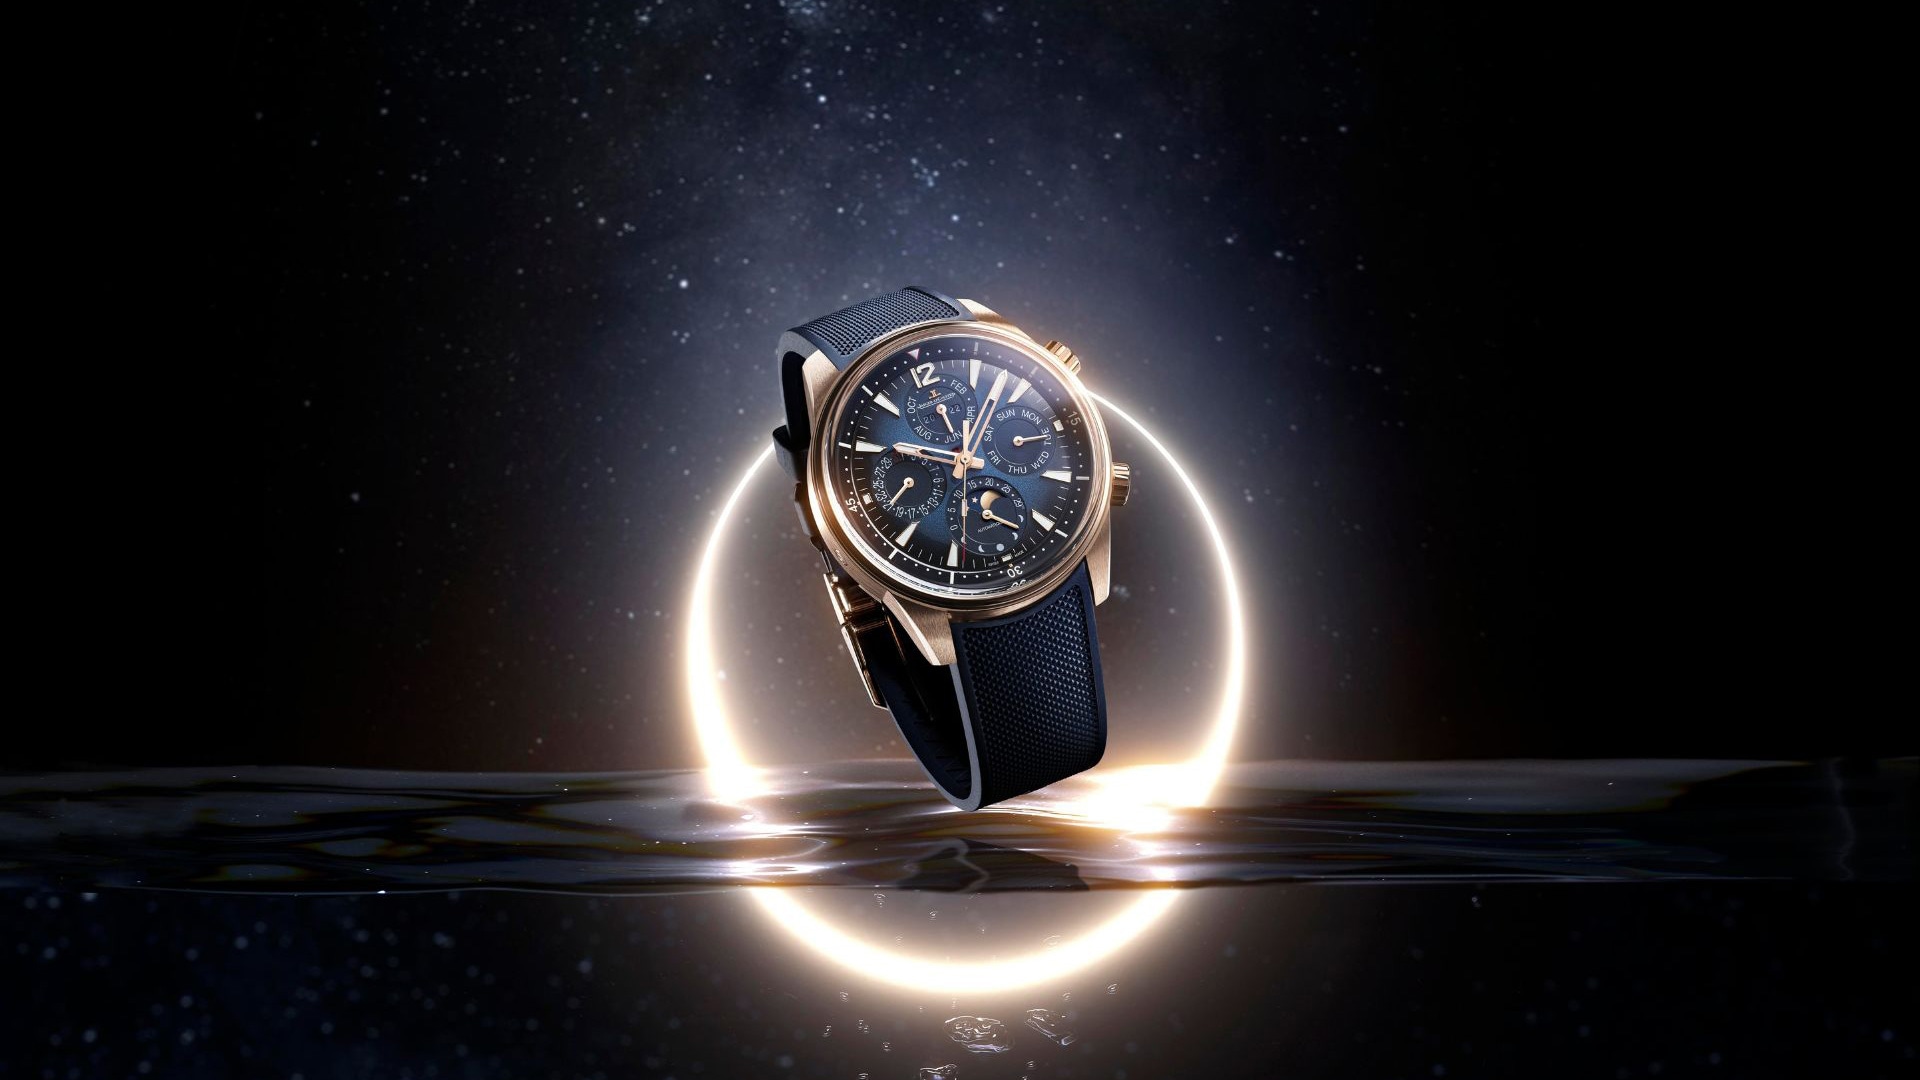 Jaeger-LeCoultre Singapore | The Shoppes at Marina Bay Sands